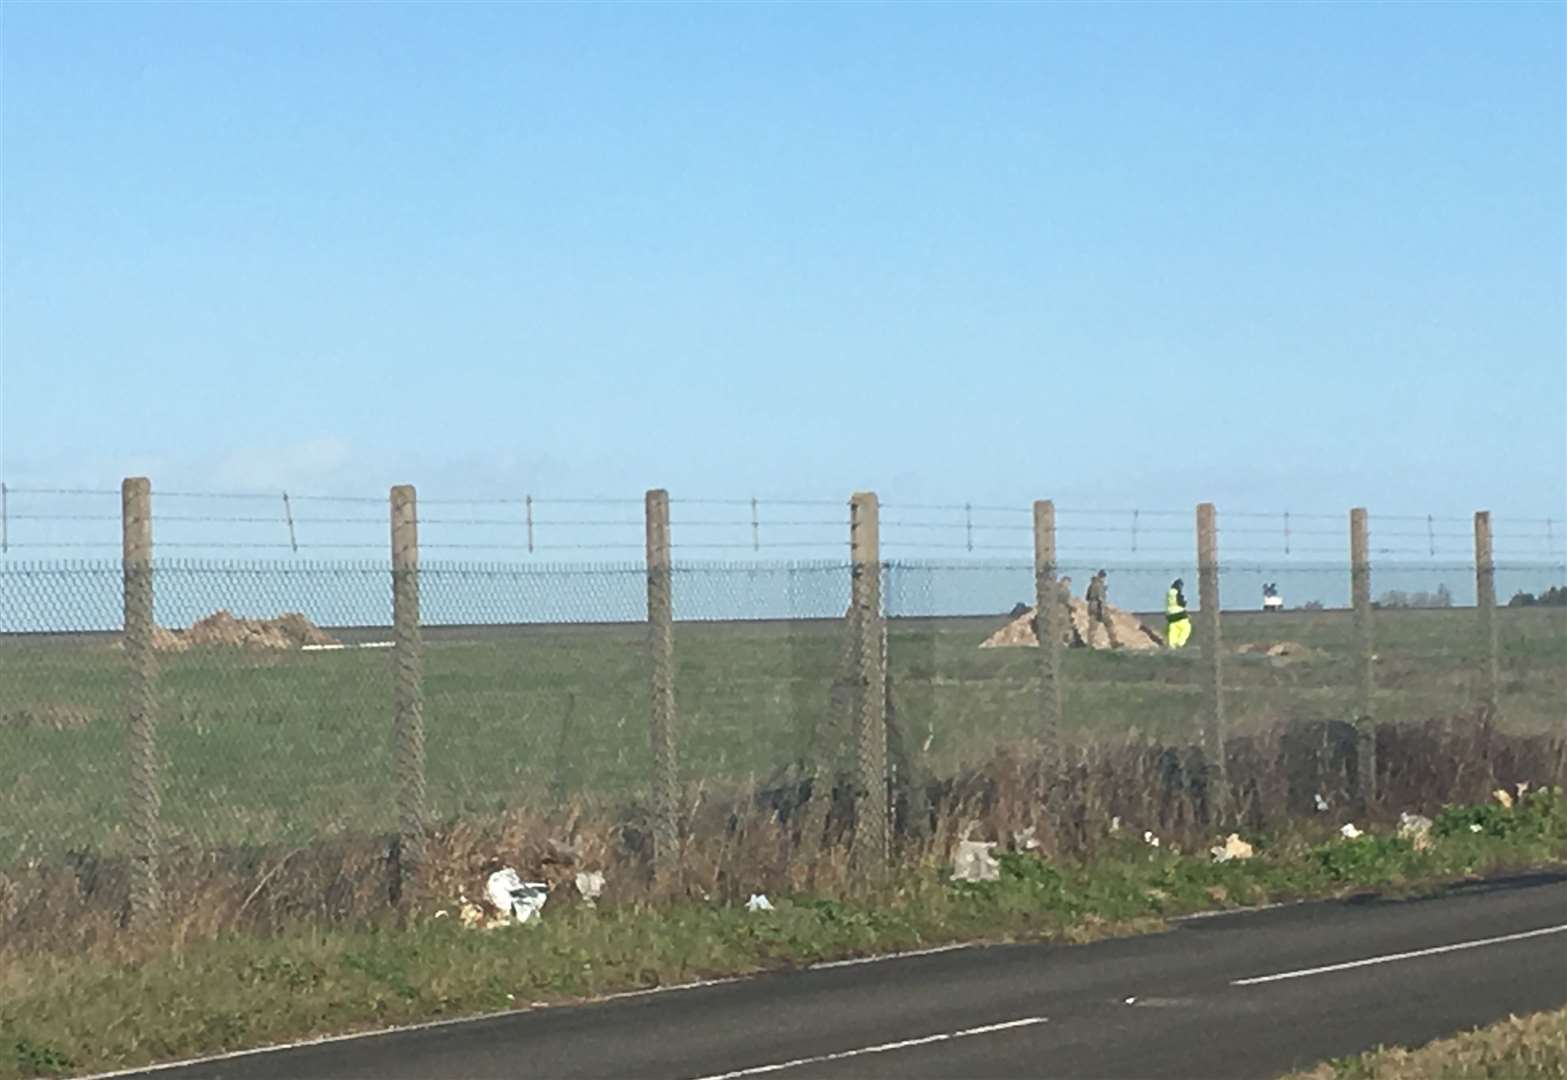 Explosives experts from the British Army have been called to Manston Airport (7797557)